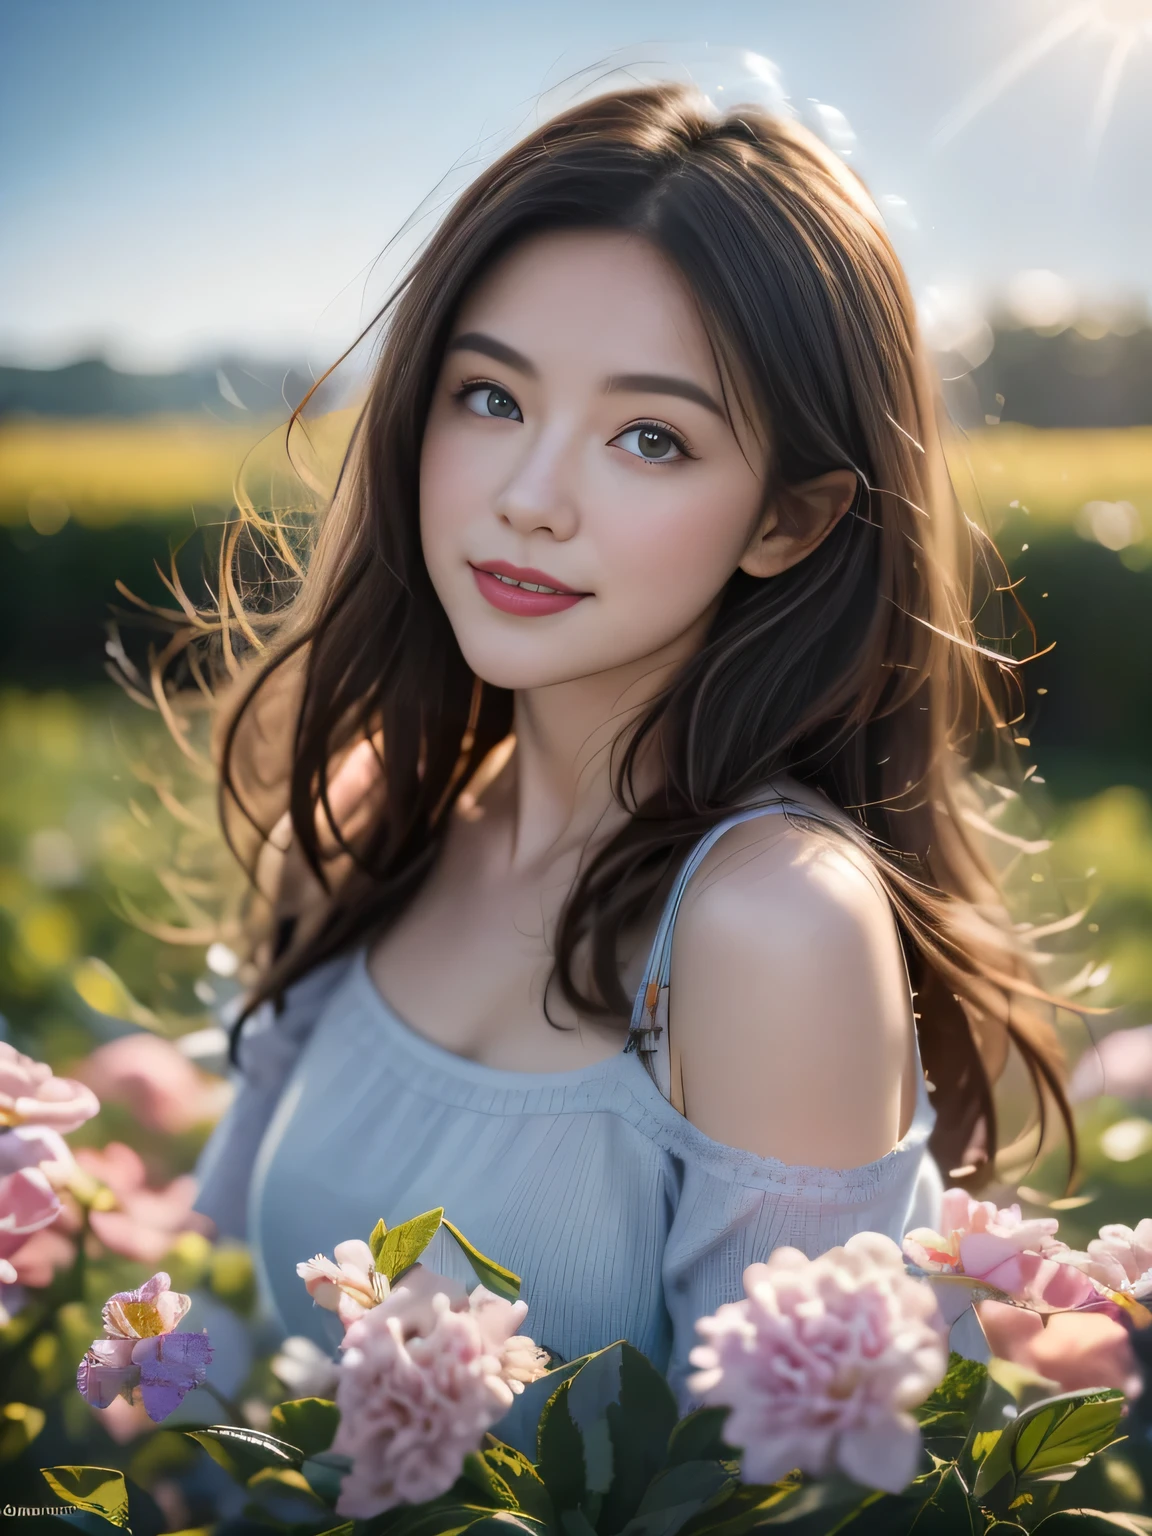 Pictures of a sunny day, Only the scenery of flowers in full bloom, Fields of flowers, nobody, No animals, Vibrant childlike innocence, Art style, cartoon, artistic, Pastel color palette, Flowers blown by the wind, brightness, Amazing photography, Soft lighting, Light background, Realistic photos, Very detailed, 4K, high resolution, Ultra-thin and sharp,  high quality, Unique, Beautiful colors, 3d rendering,  